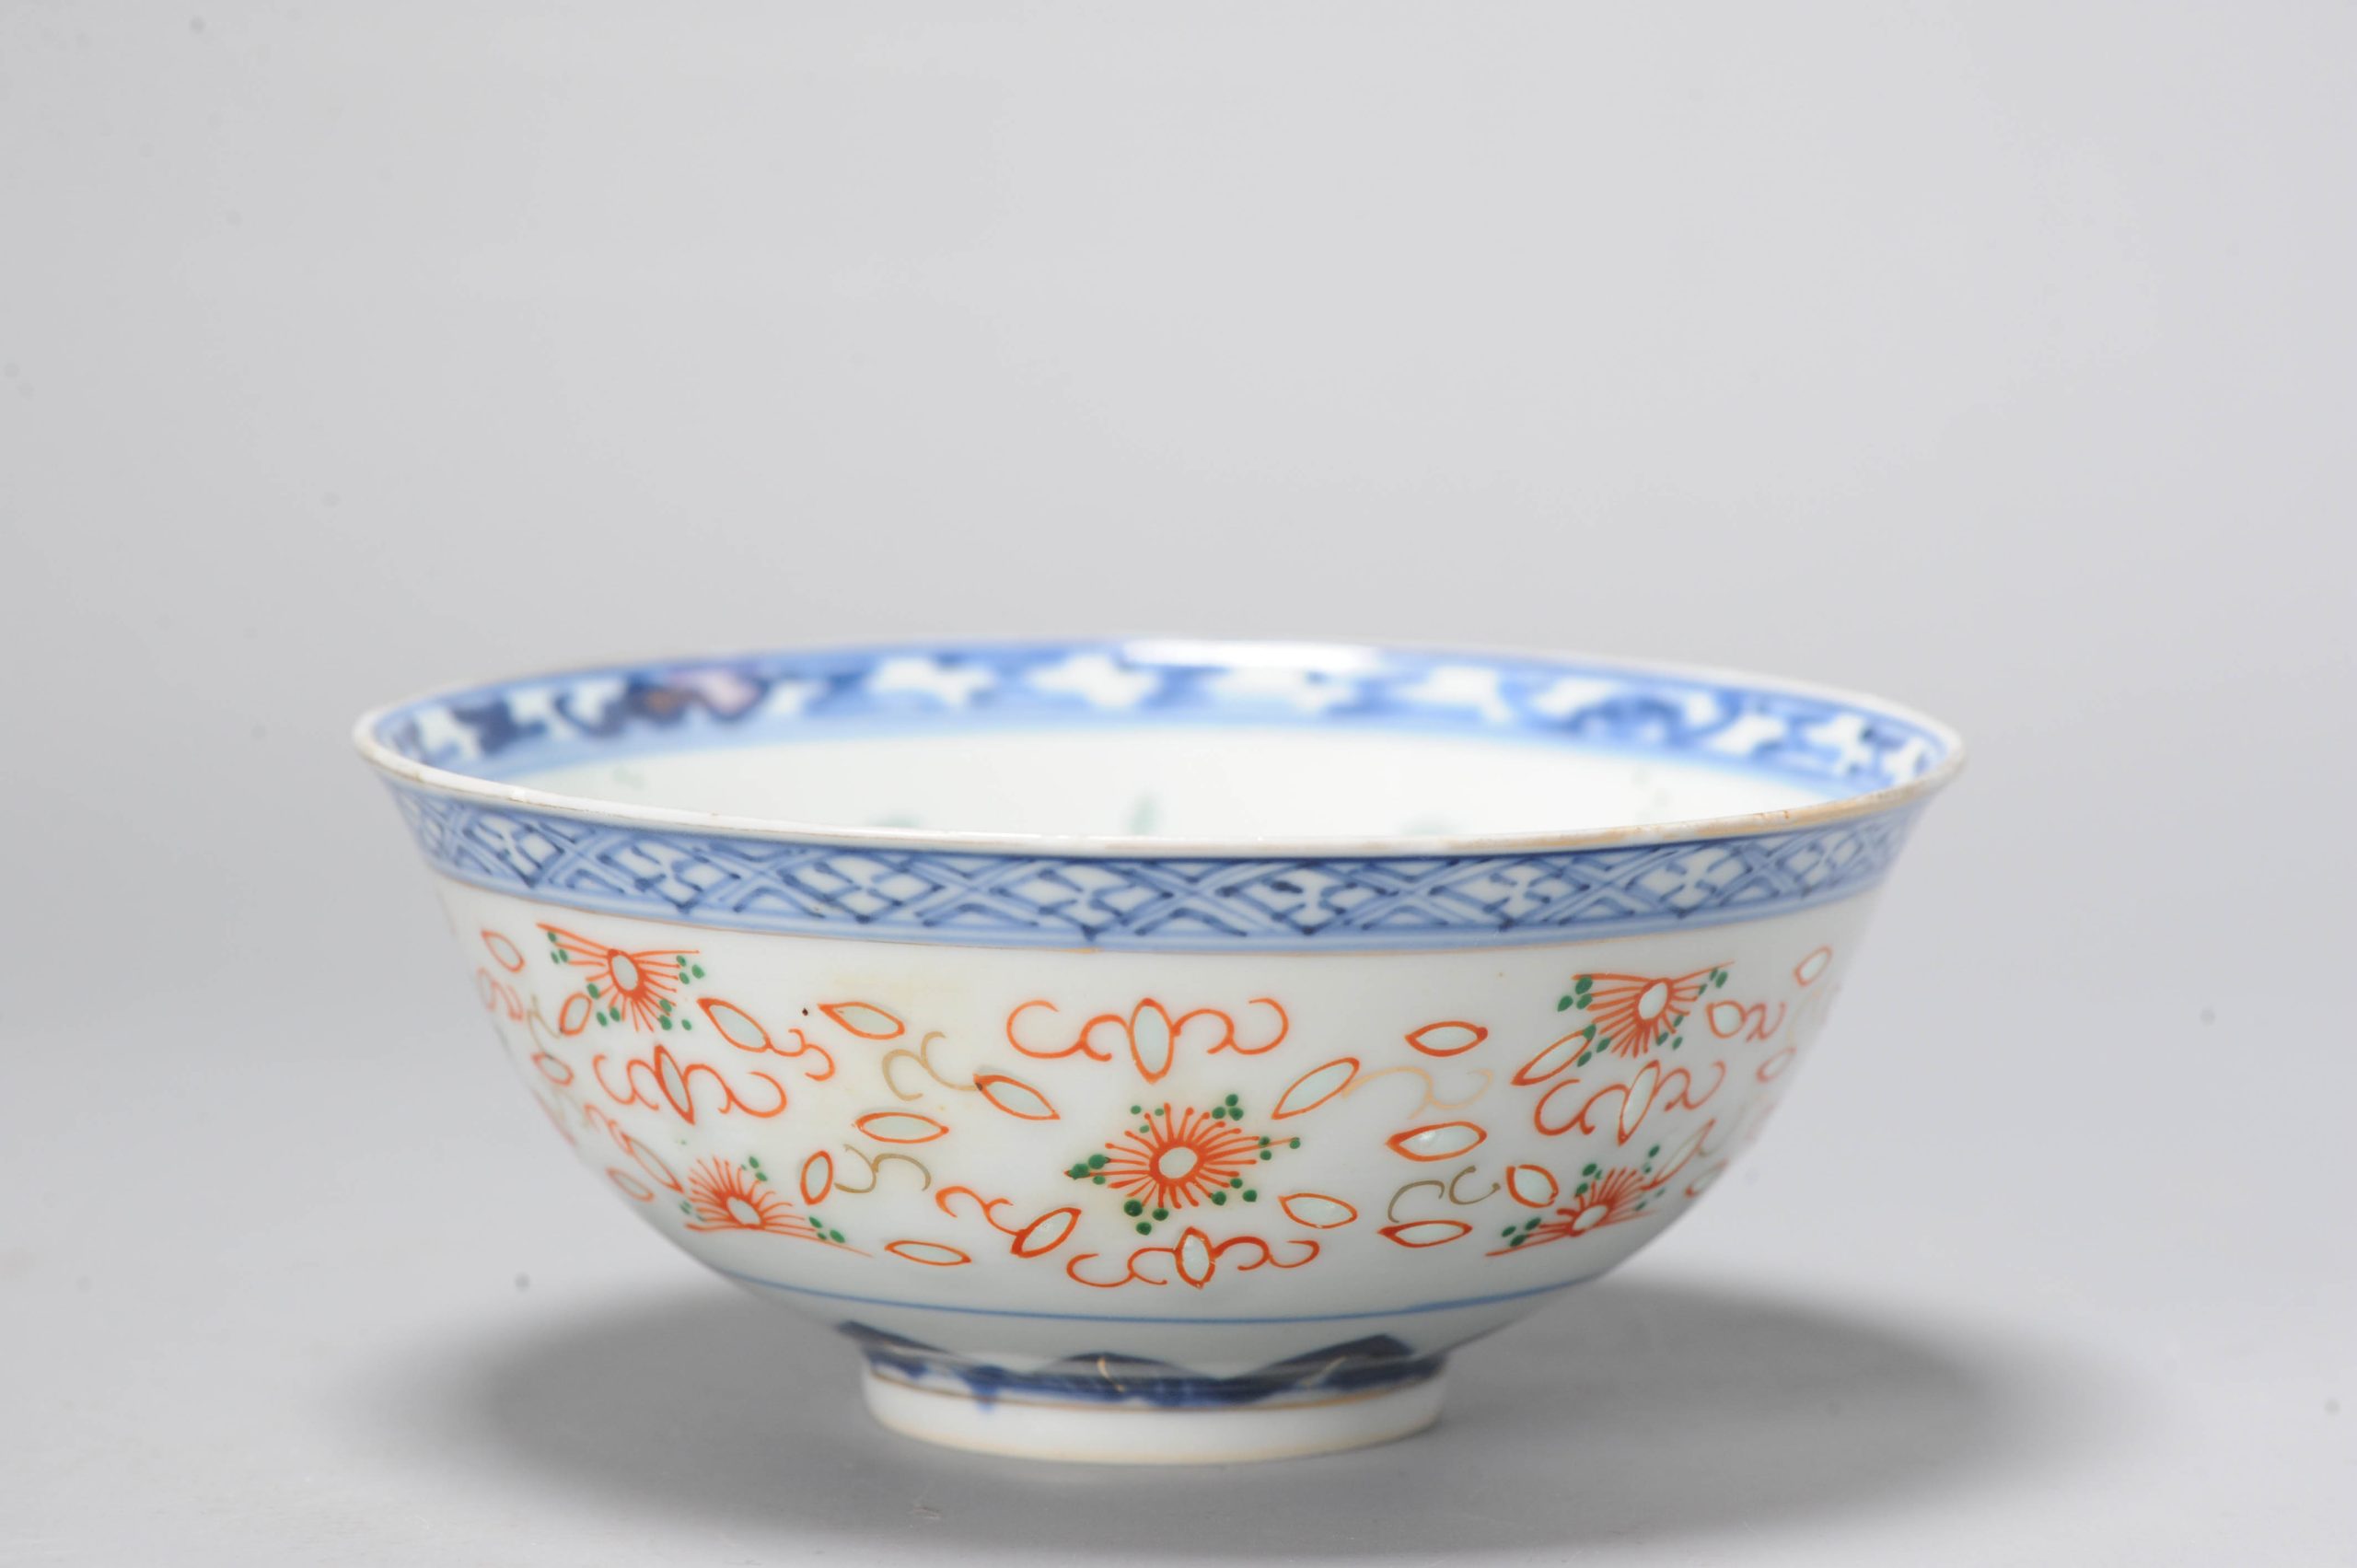 Antique Chinese Republic period Rice grain bowl with flowers, China 20th c.